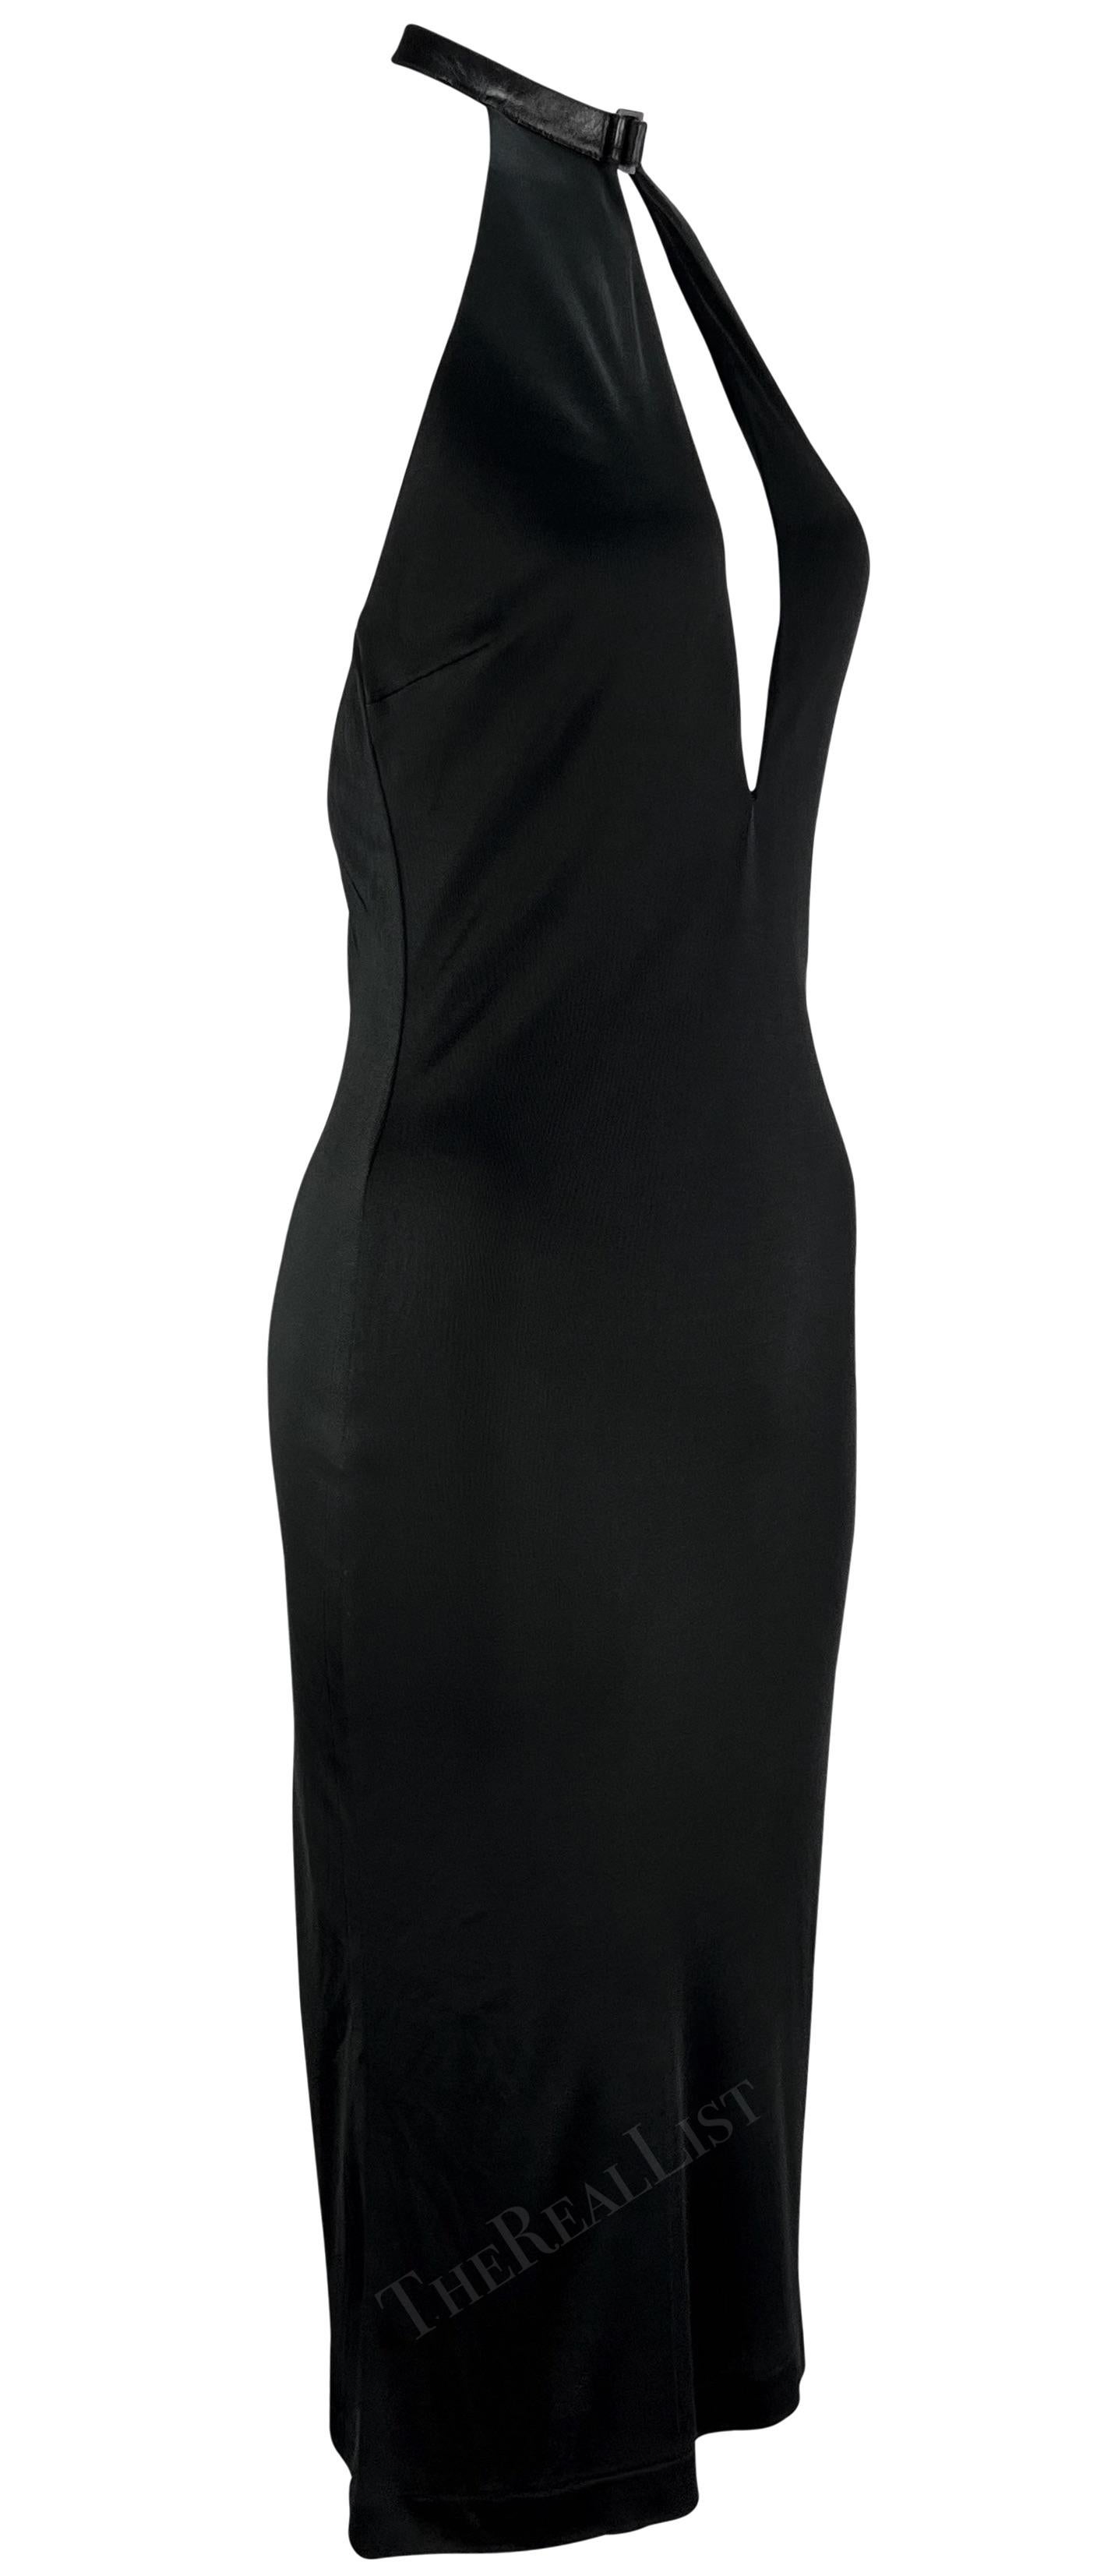 S/S 2001 Gucci by Tom Ford Black Leather Halter Strap Plunging Backless Dress For Sale 3